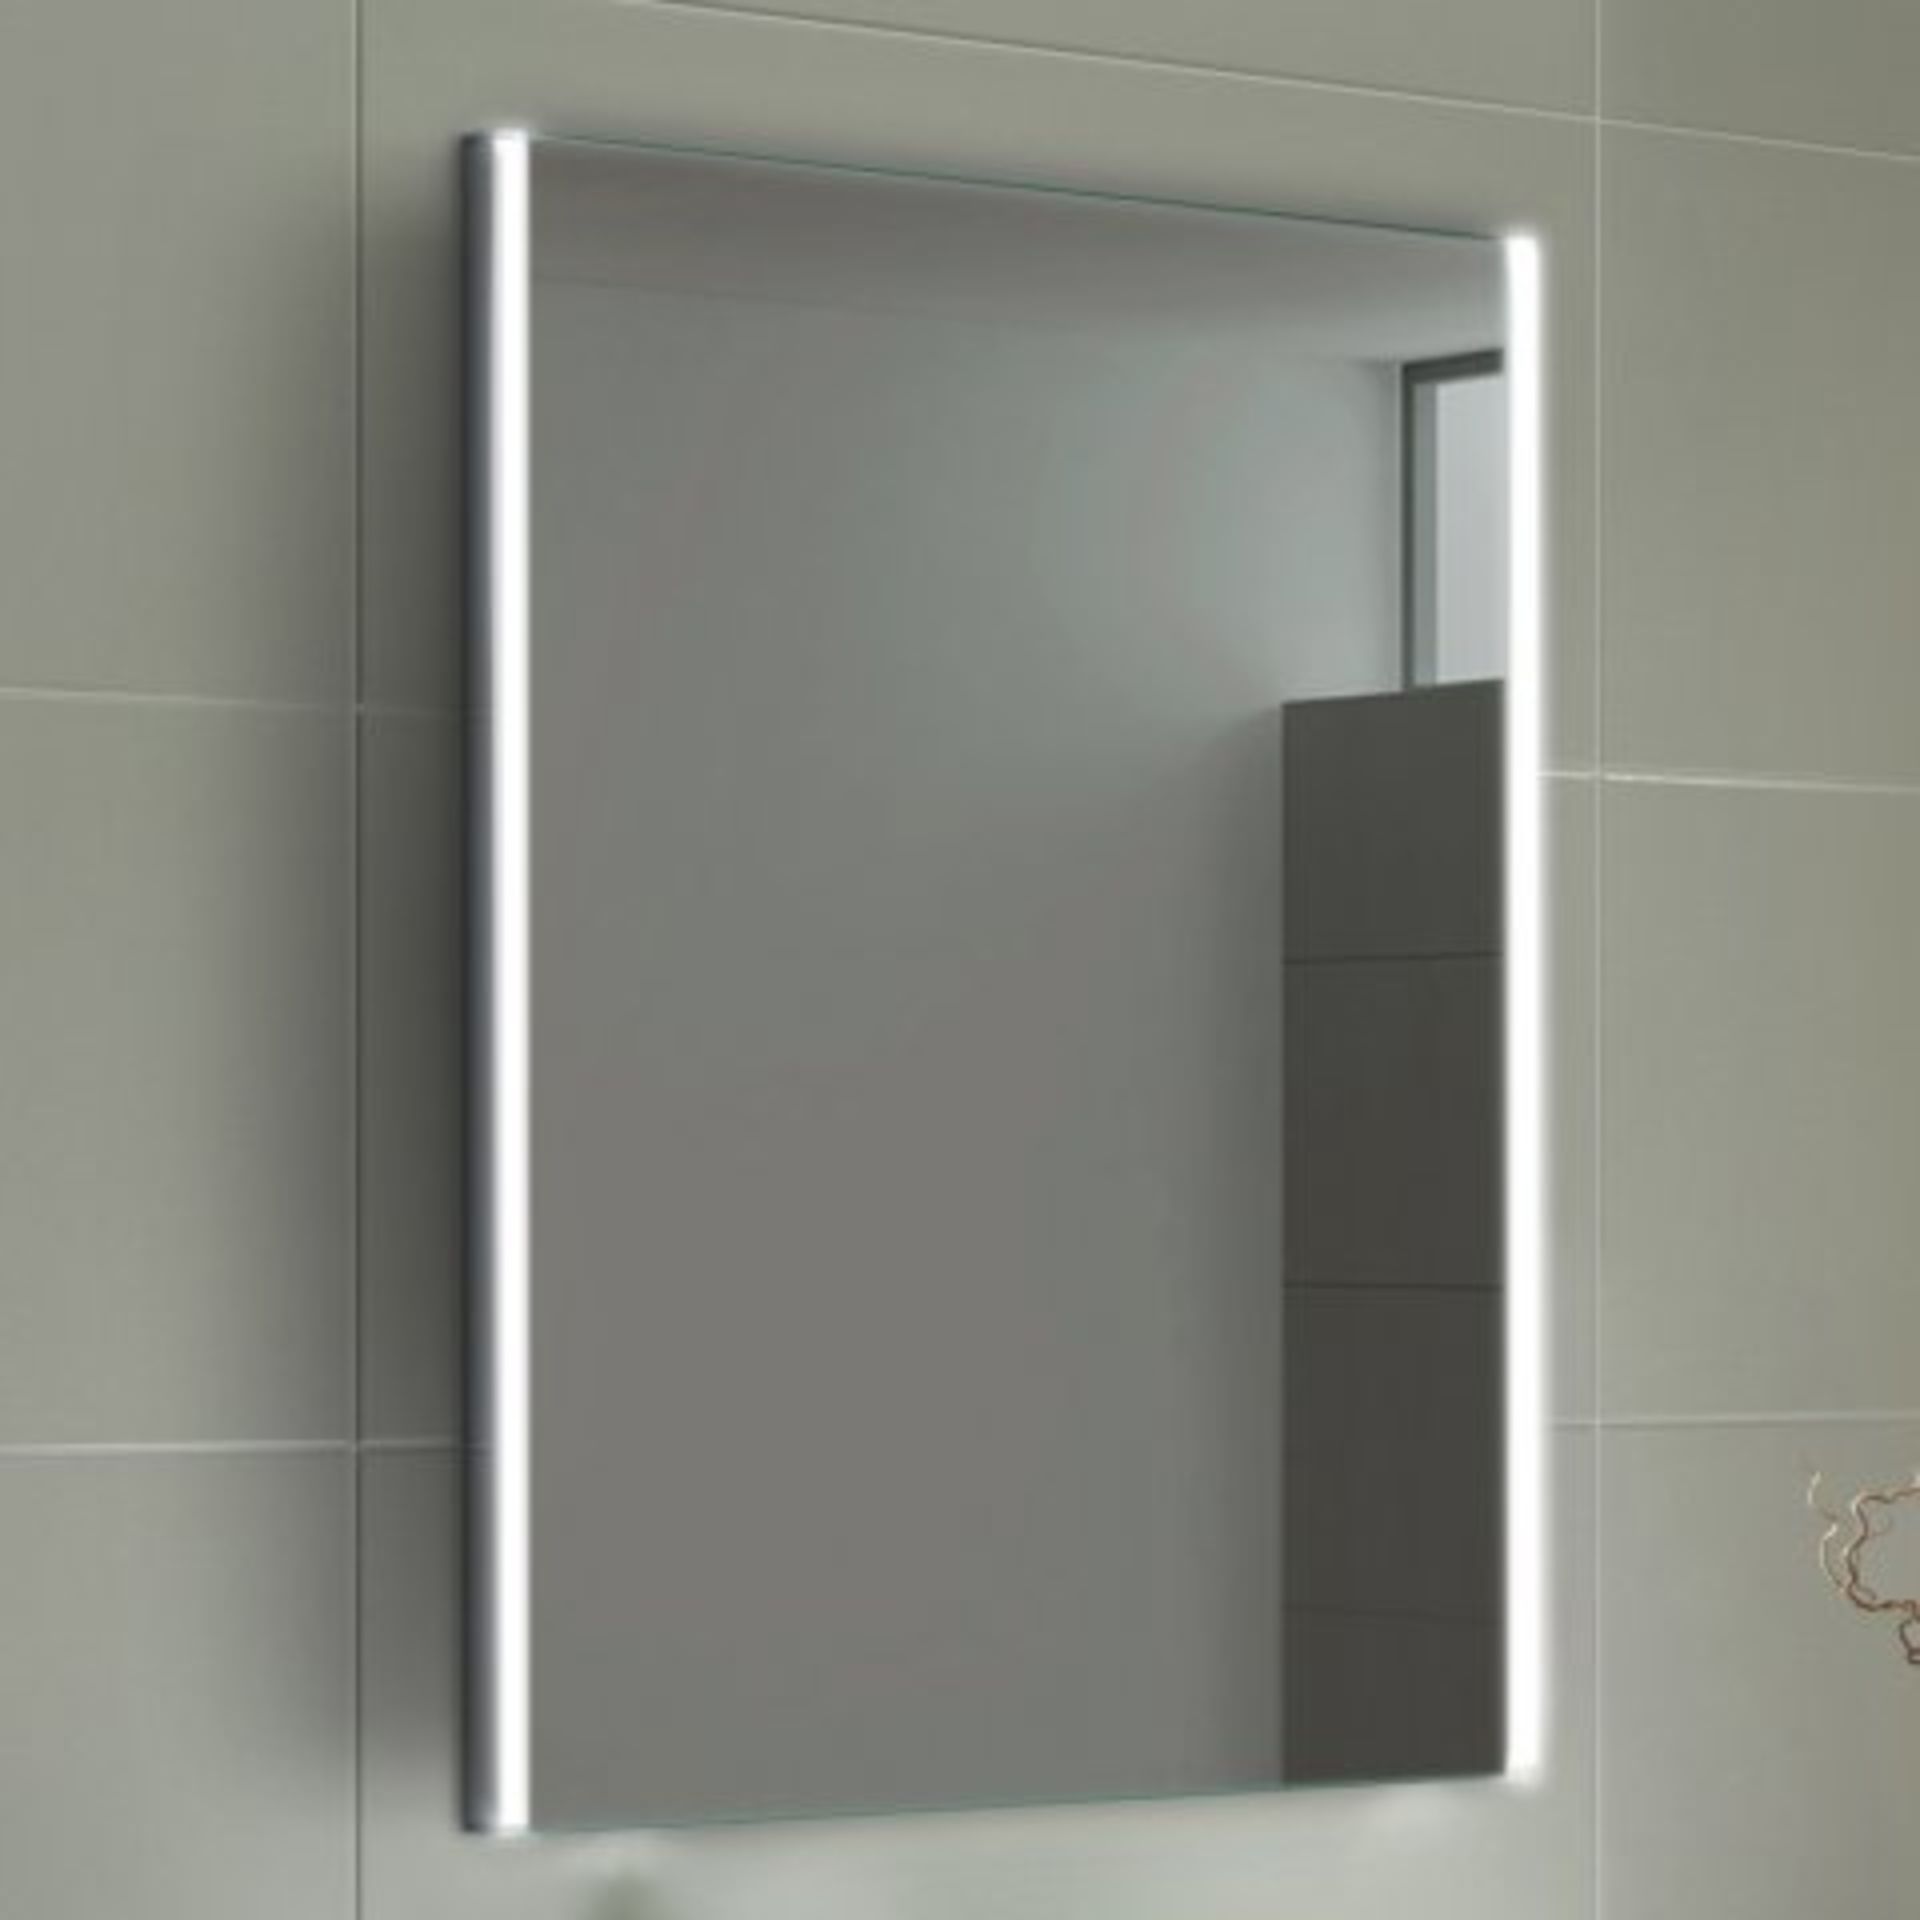 (L130) 700x500mm Lunar Illuminated LED Mirror RRP £349.99. Our Lunar range of mirrors comprises of - Image 4 of 8